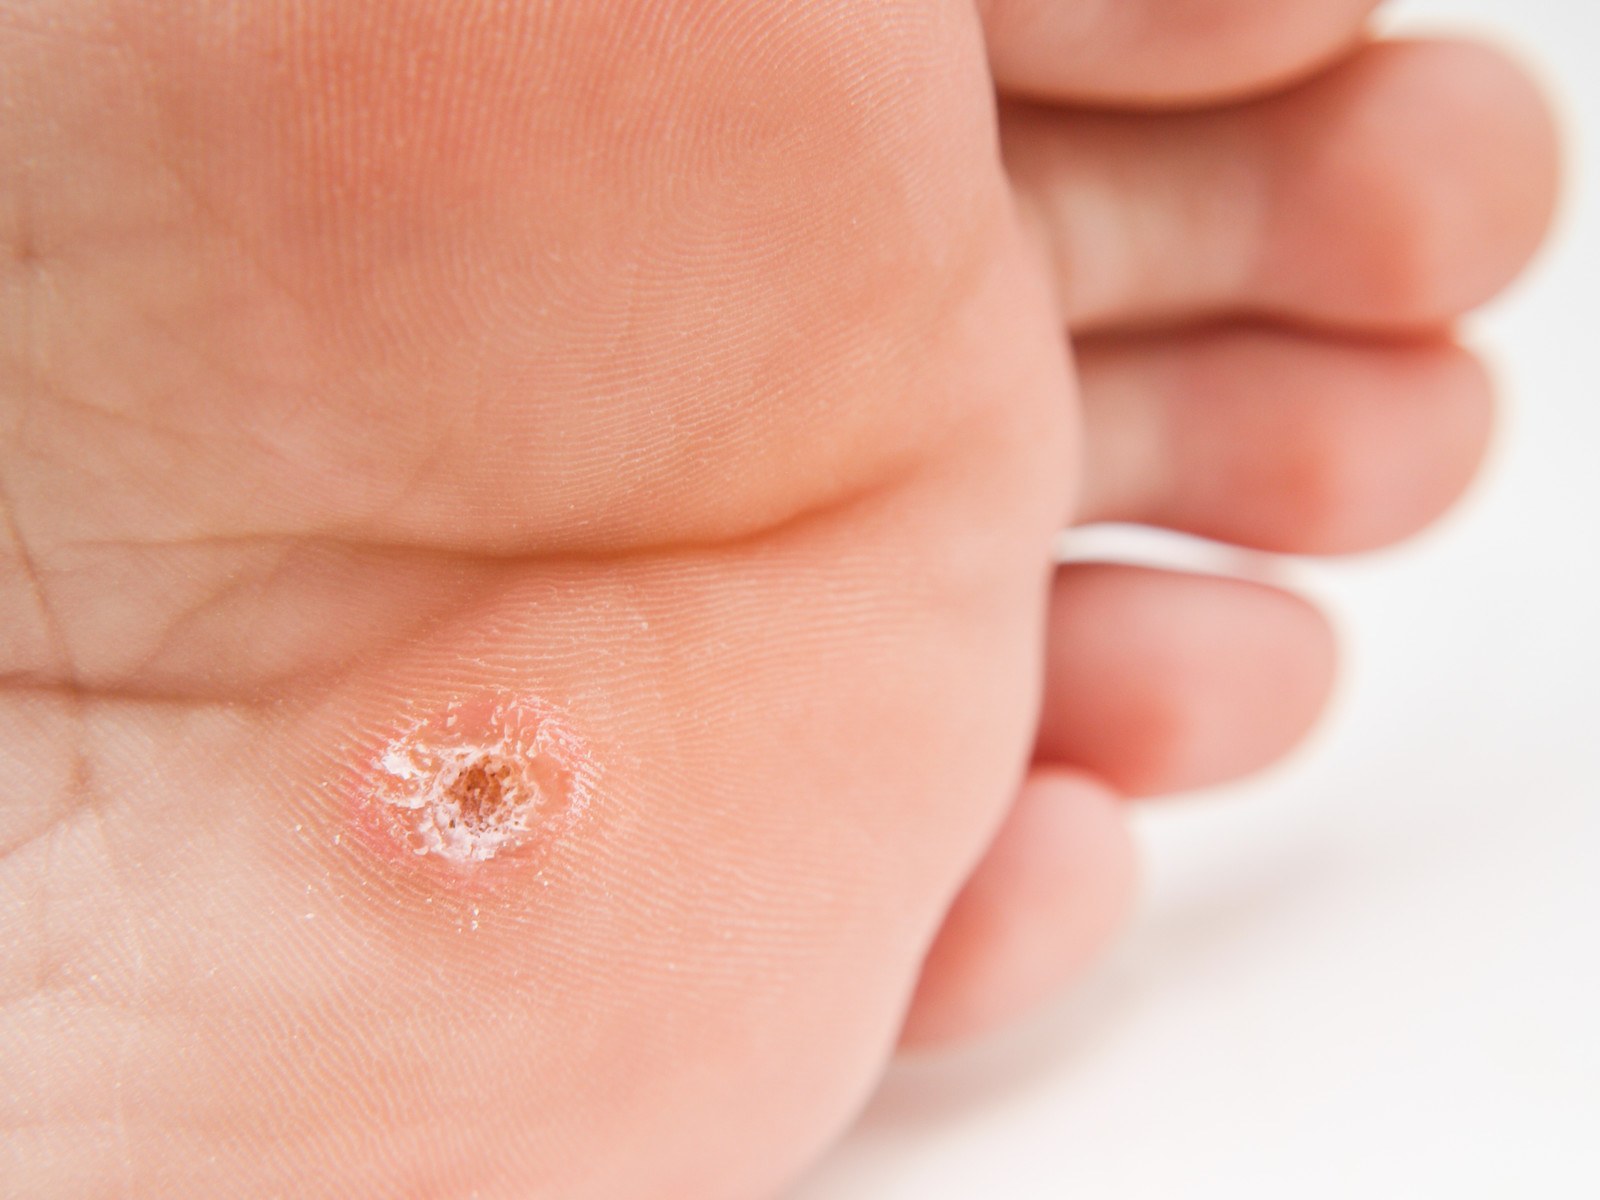 Plantar Warts Commonly Mistaken for 